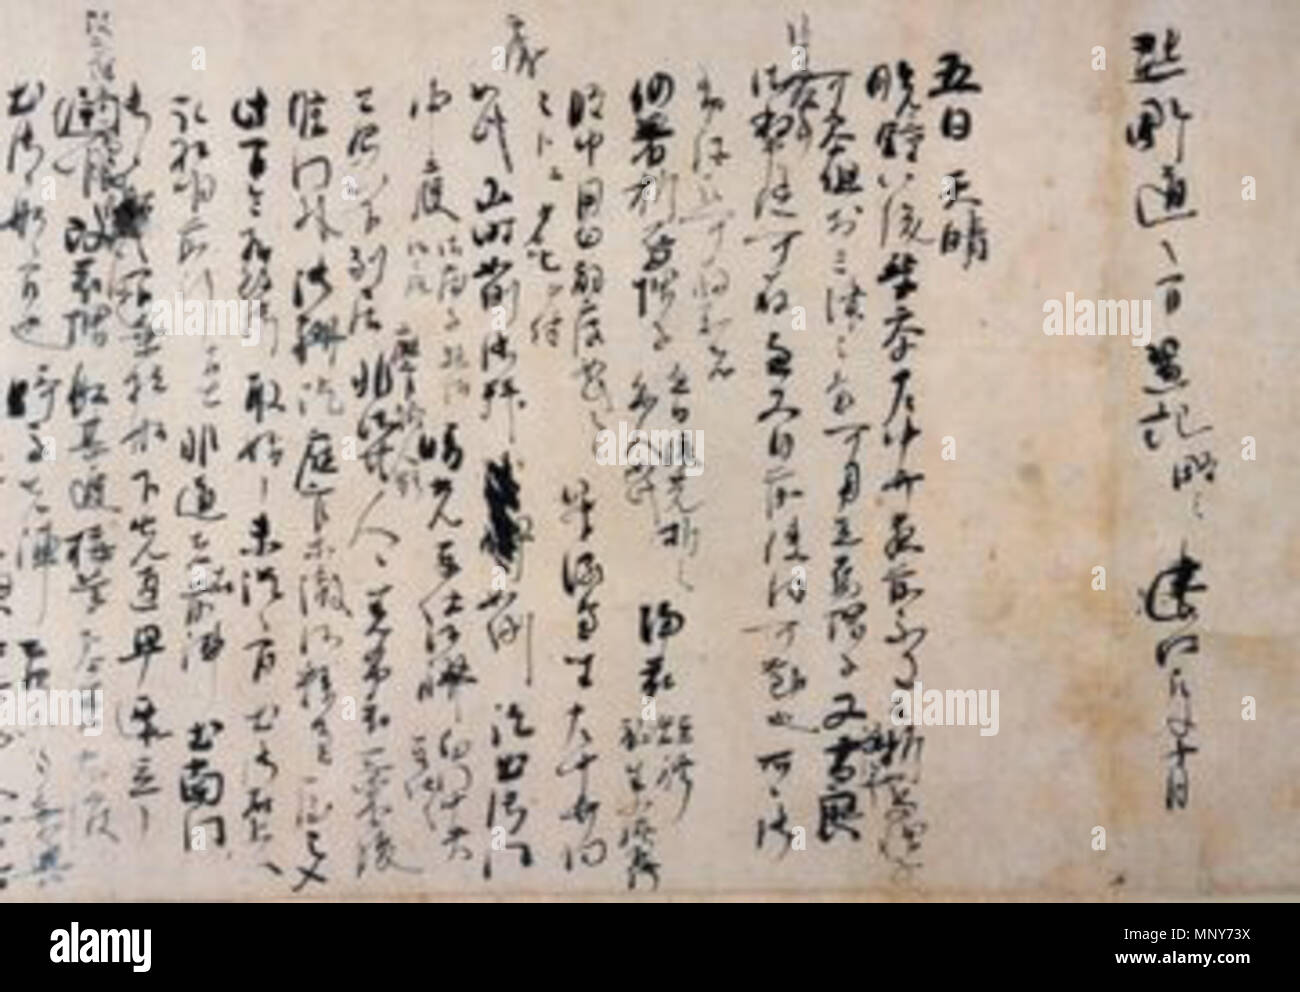 . English: Visit of the cloistered Emperor to Kumano (熊野御幸記, kumano gokōki). Diary in classical Chinese of a visit with Emperor Go-Toba and Minamoto no Michichika to Kumano (熊野). Part of one handscroll, ink on paper, 30.1 cm × 678.0 cm (11.9 in × 266.9 in) located at Mitsui Memorial Museum, Tokyo. The scroll has been designated as National Treasure of Japan in the category ancient documents. 1201. Fujiwara no Teika 1241 Visit of the cloistered Emperor to Kumano Stock Photo